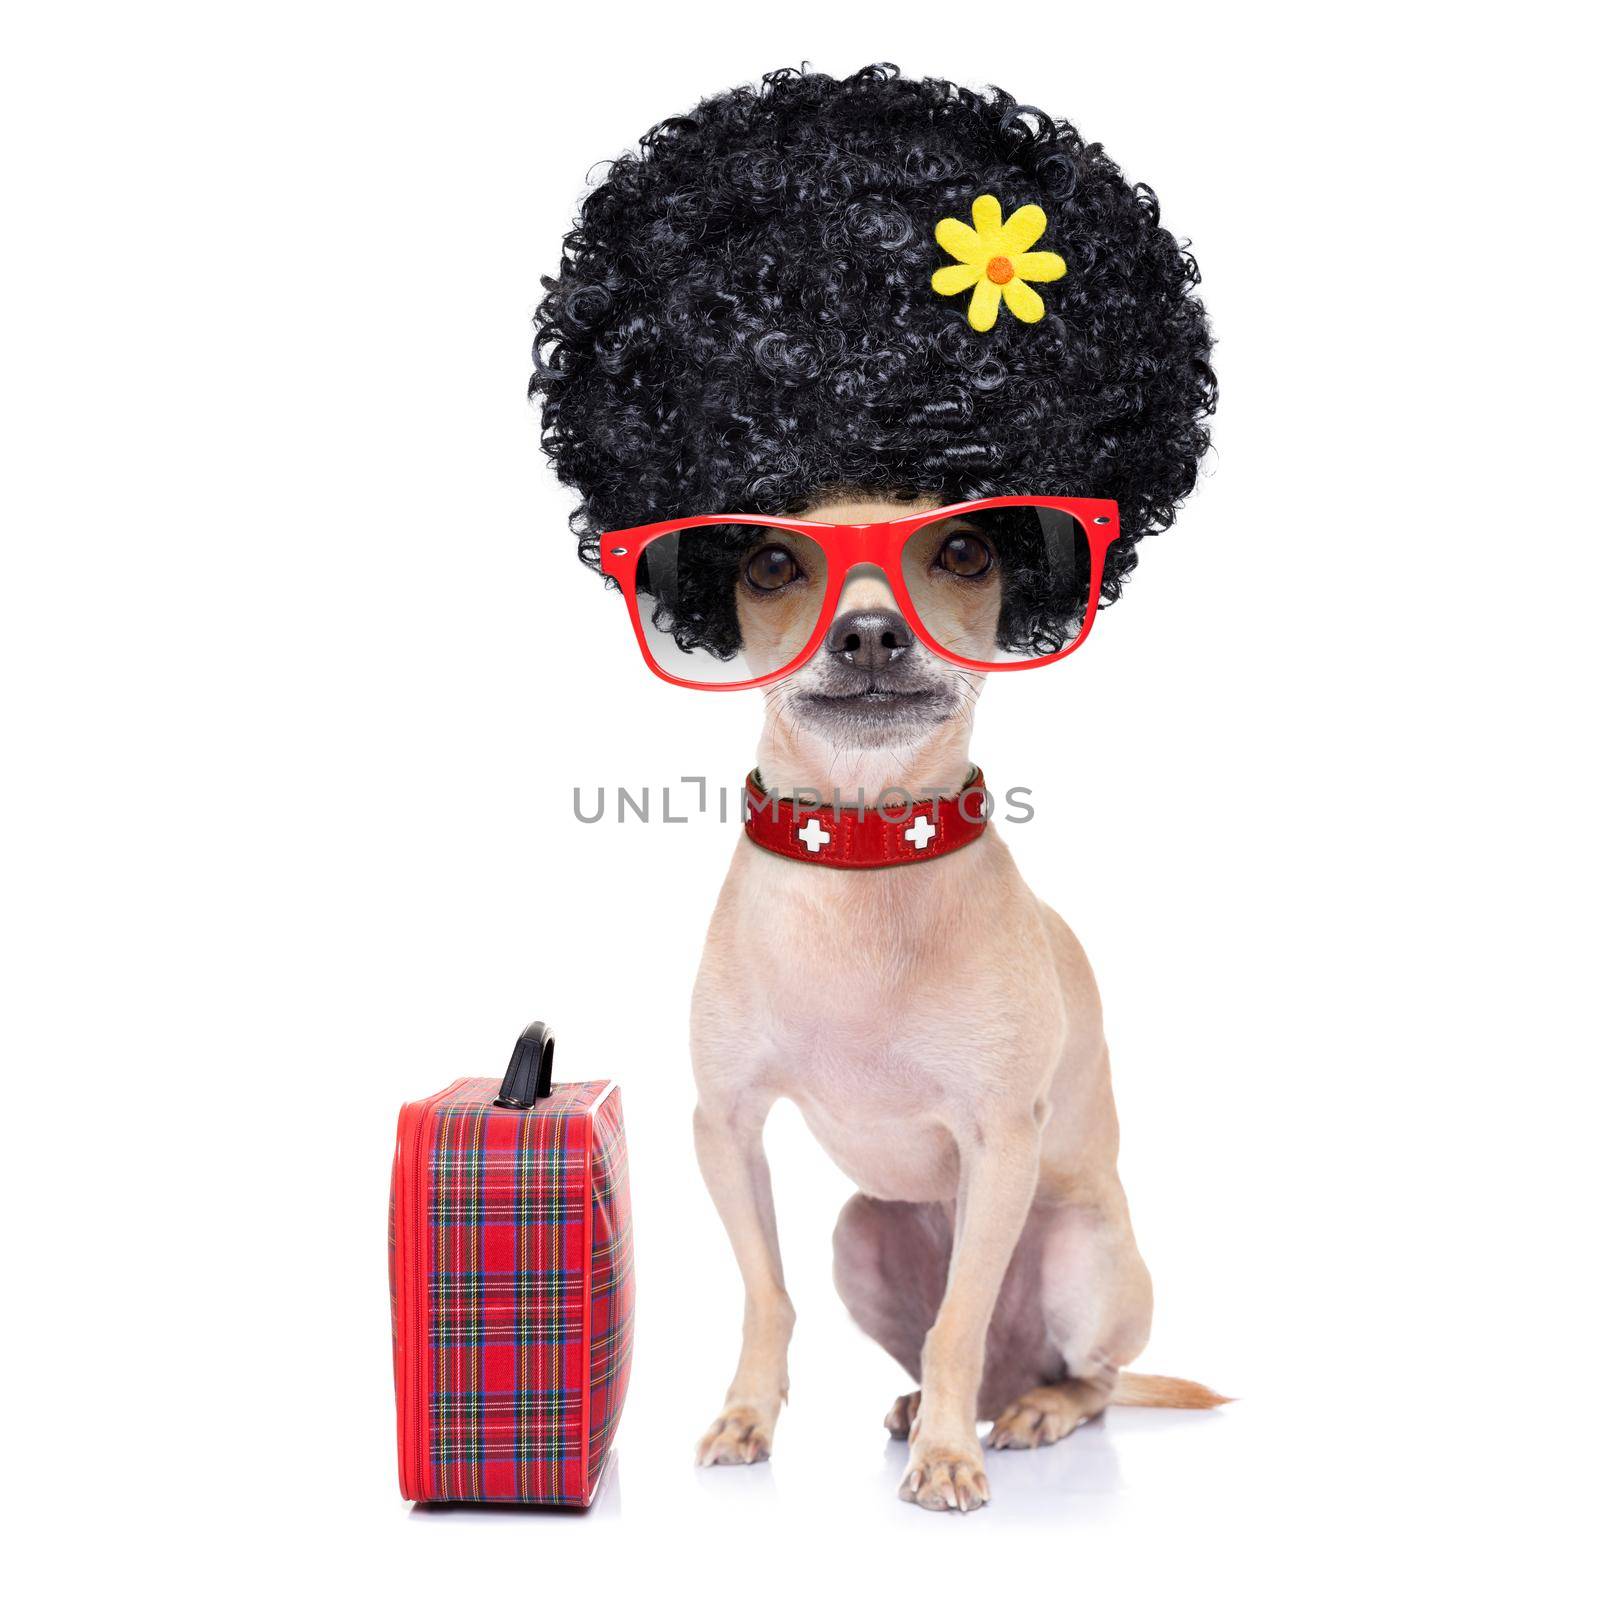 chihuahua dog  ready for vacation summer holidays,  with a bag or luggage, isolated on white background